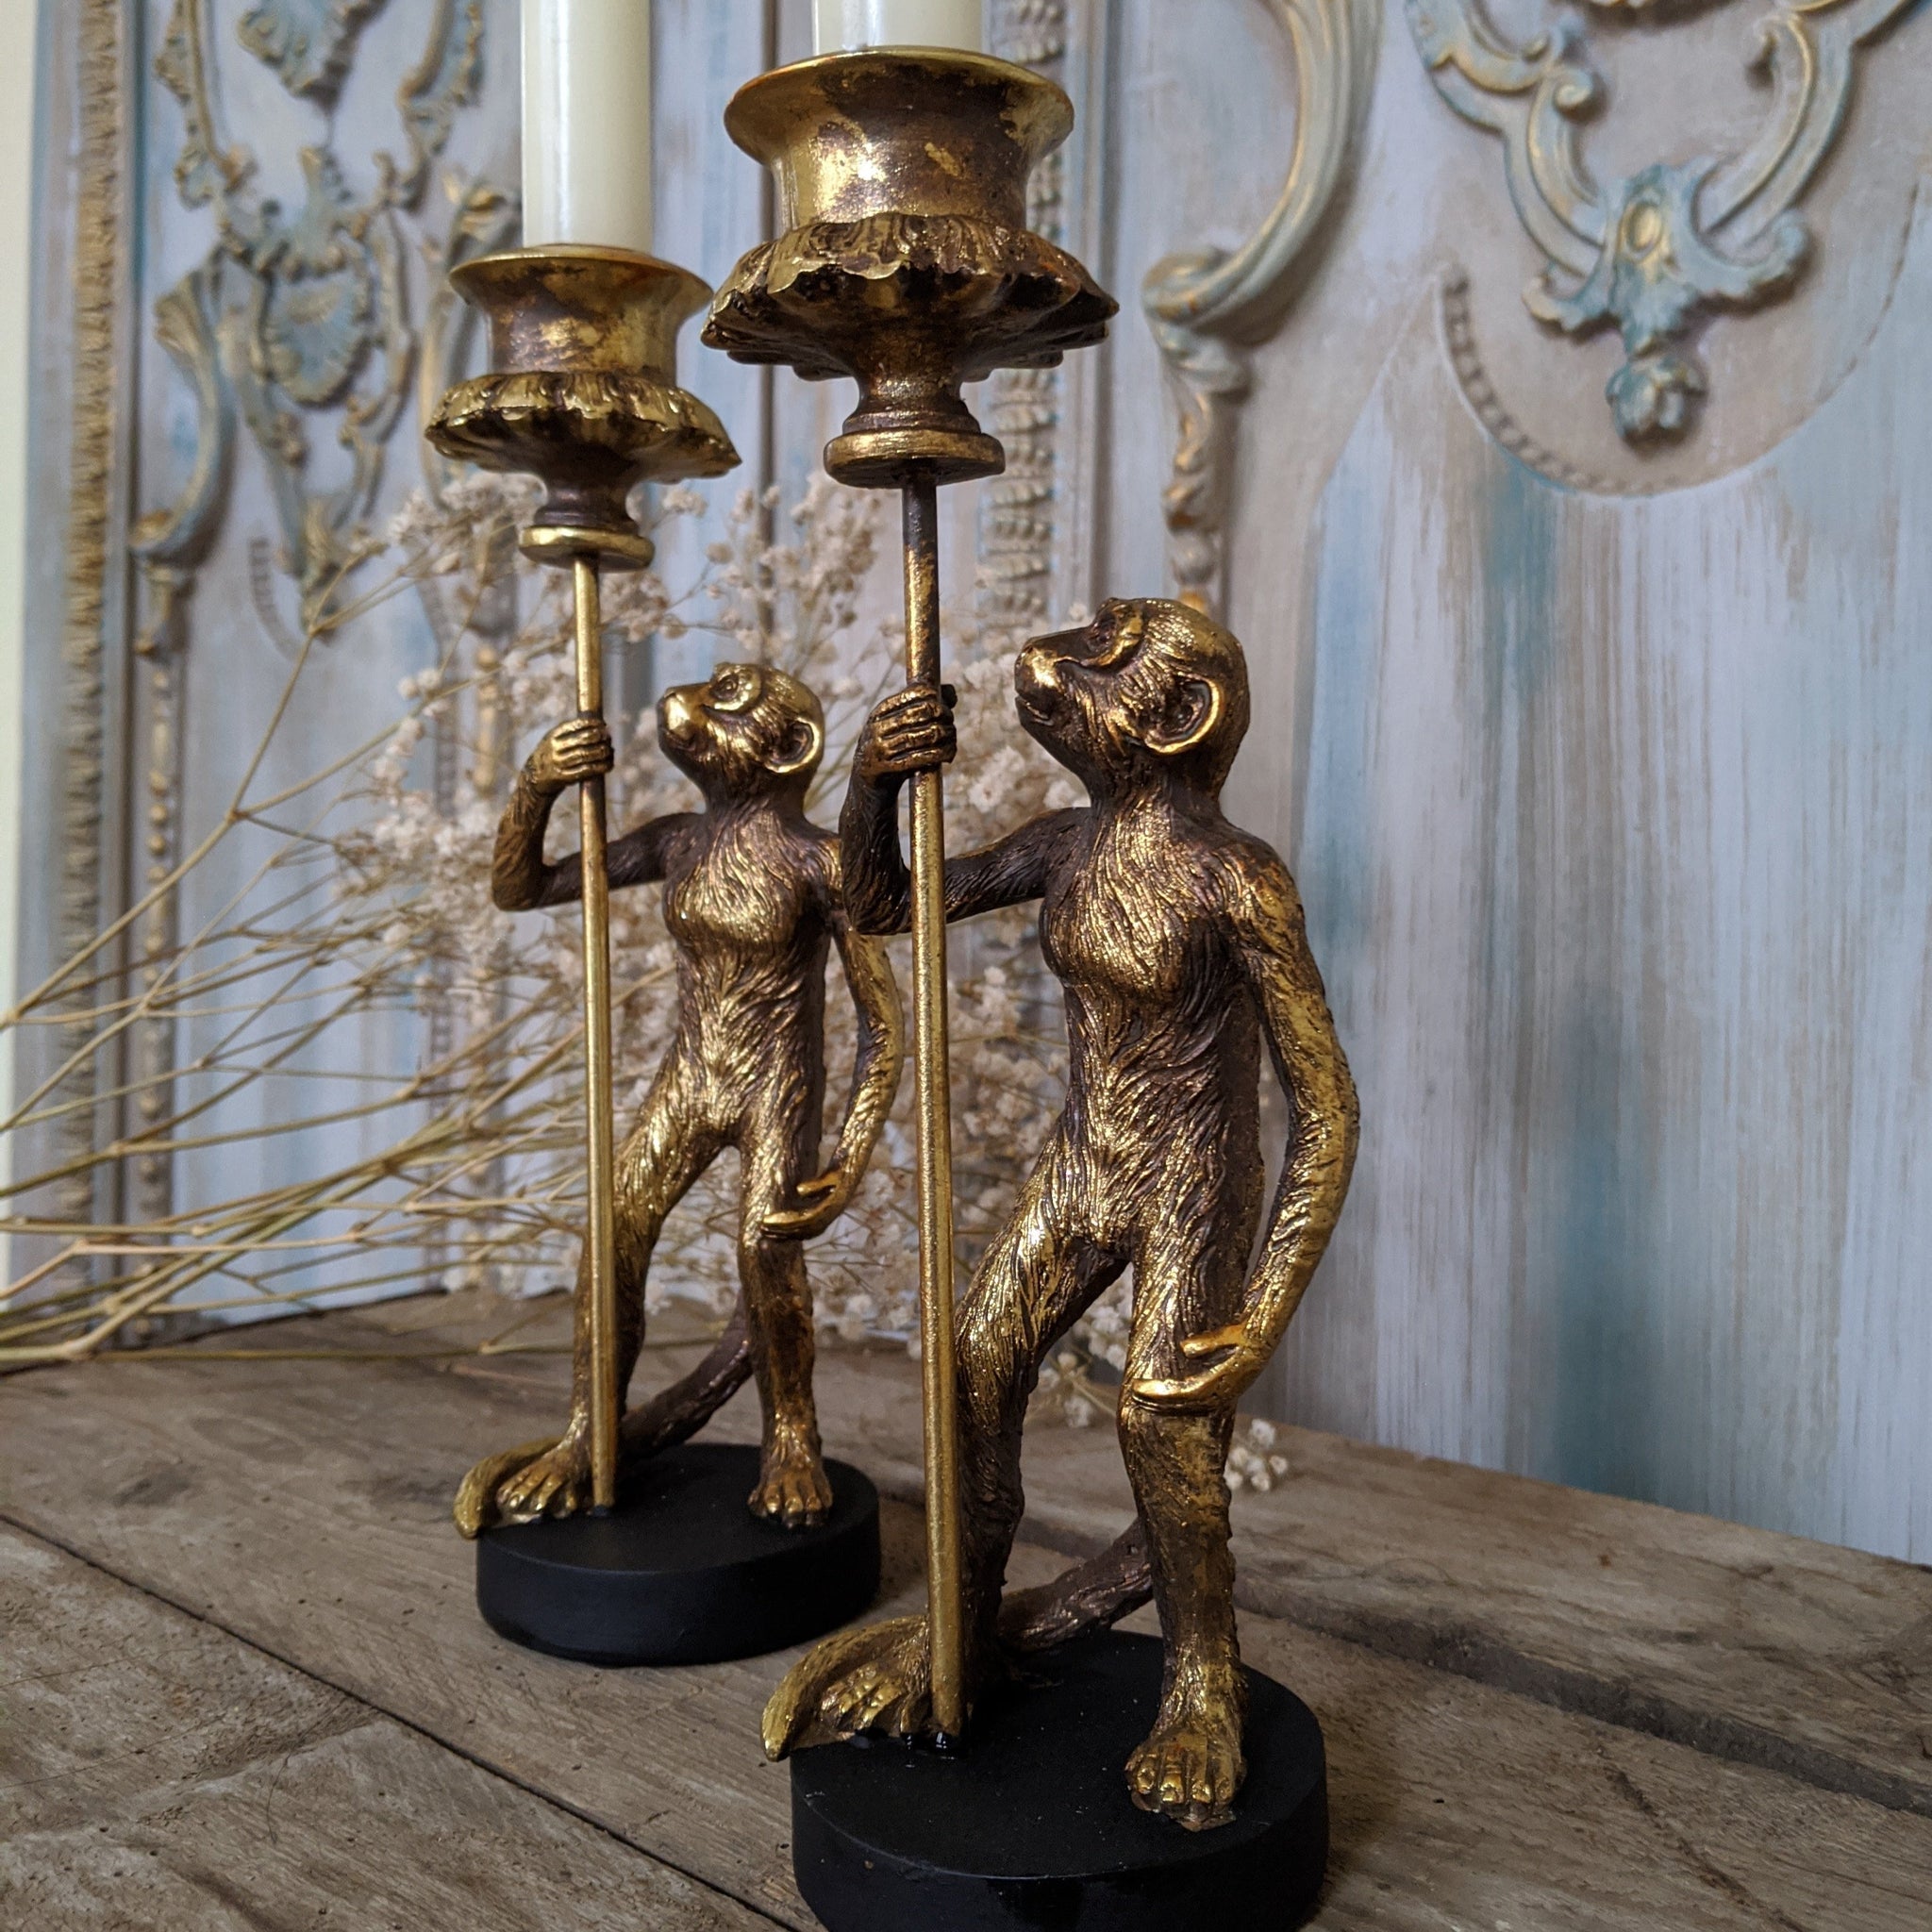 New Vintage French Style Shabby Chic GOLD MONKEY Candlestick Candle Holder